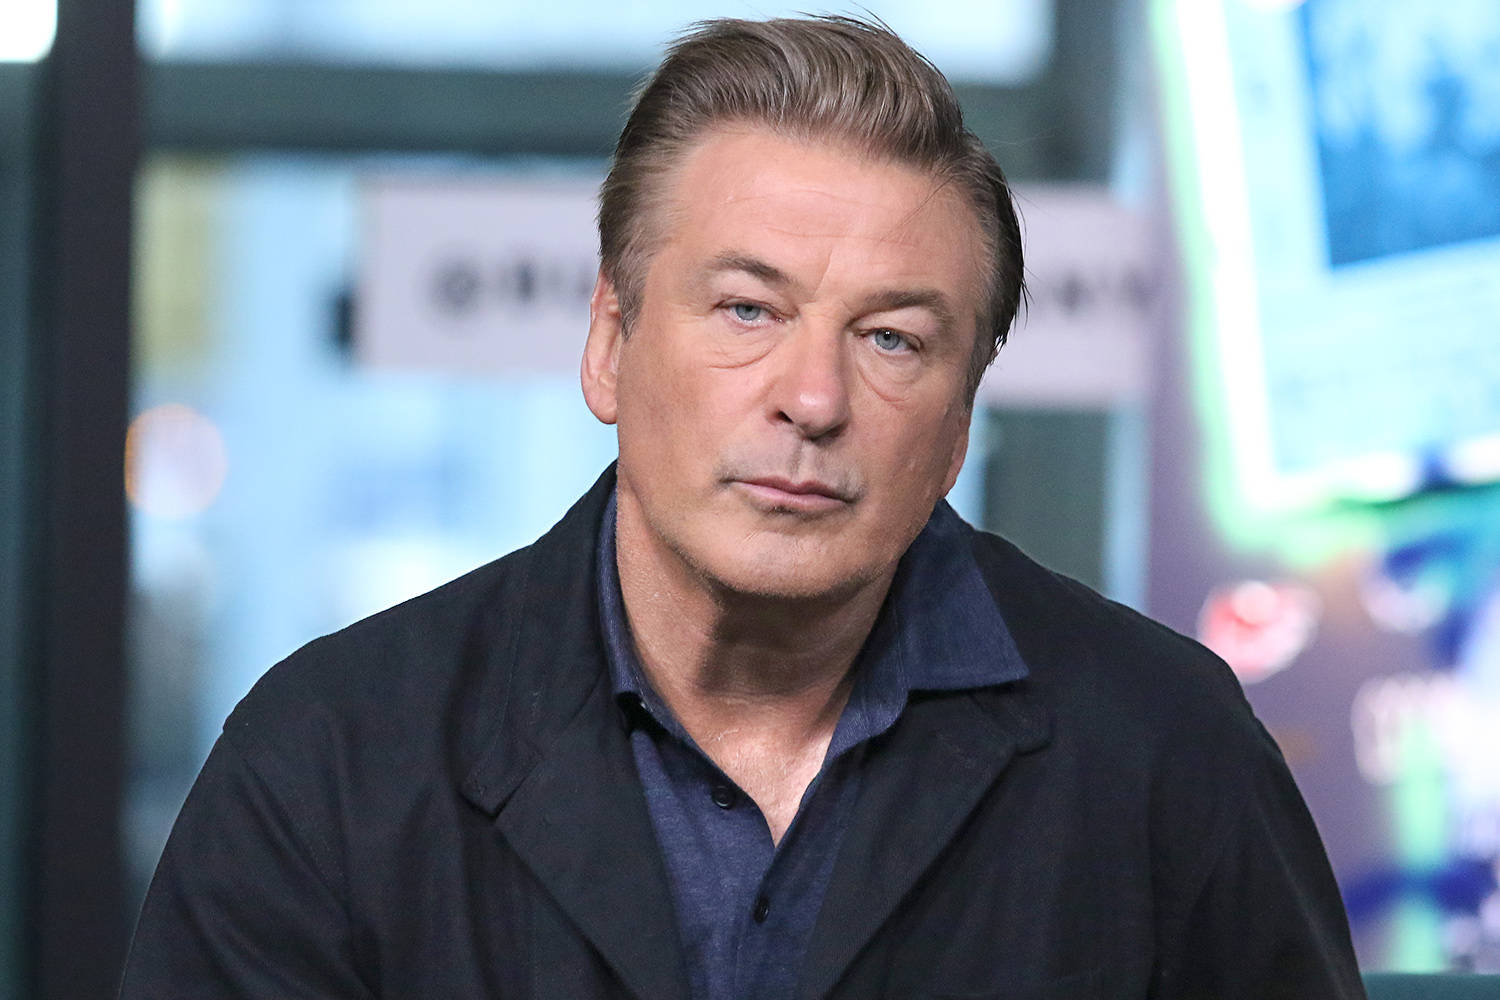 Alec Baldwin During An Interview Background